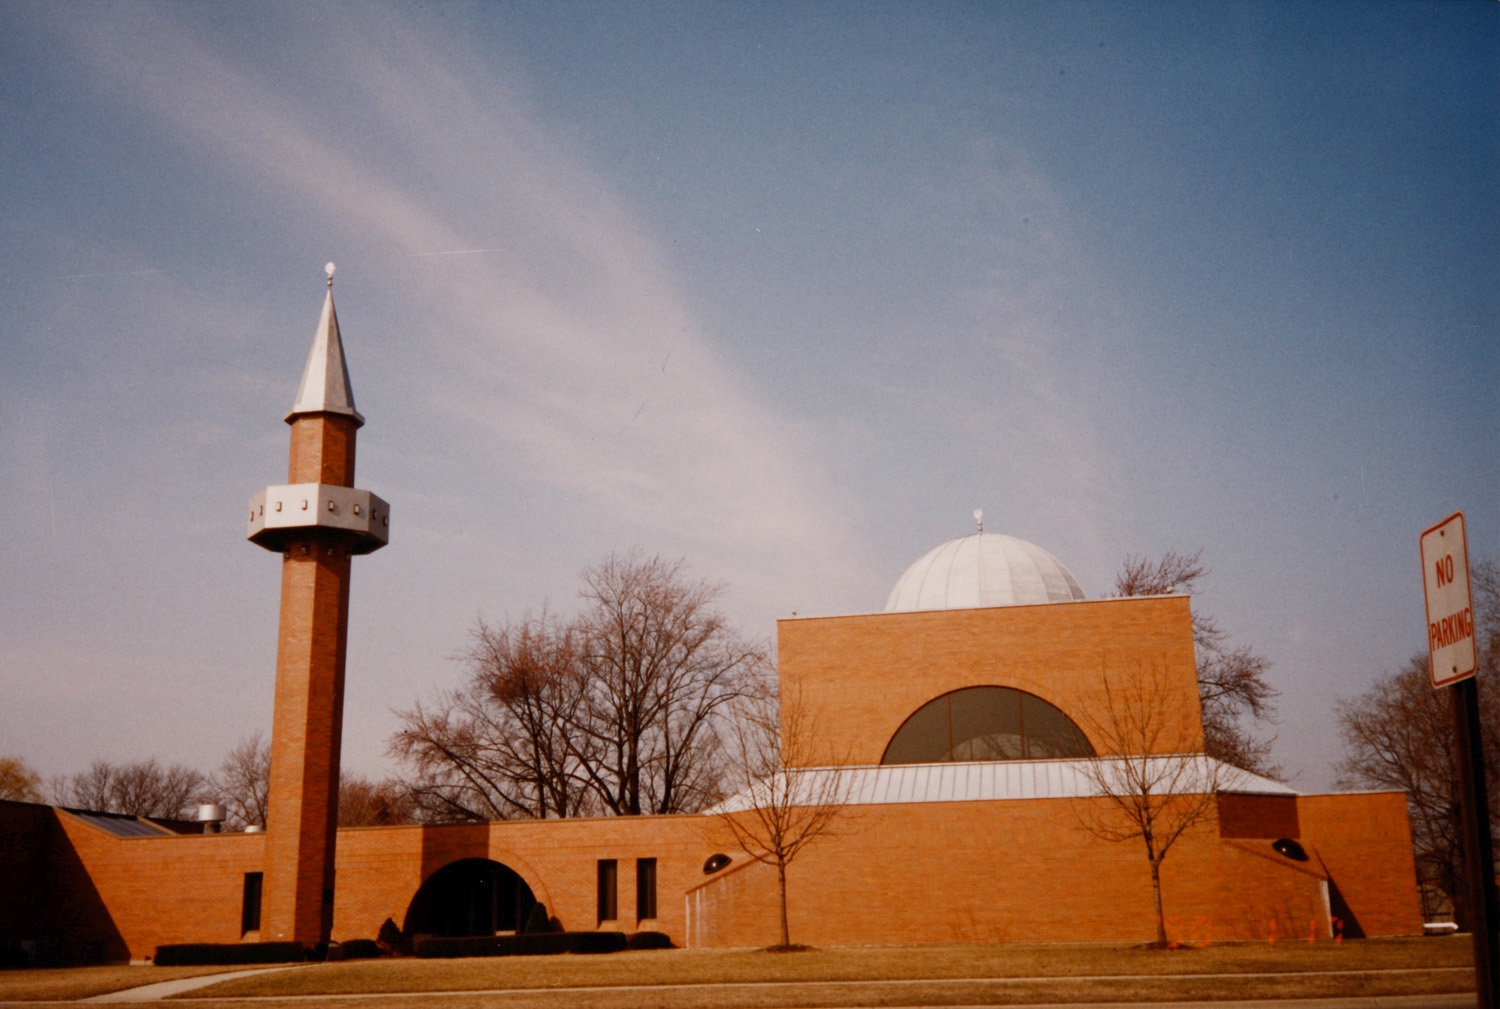 Exterior view, northern portion of front facade, with domed prayer hall and minaret